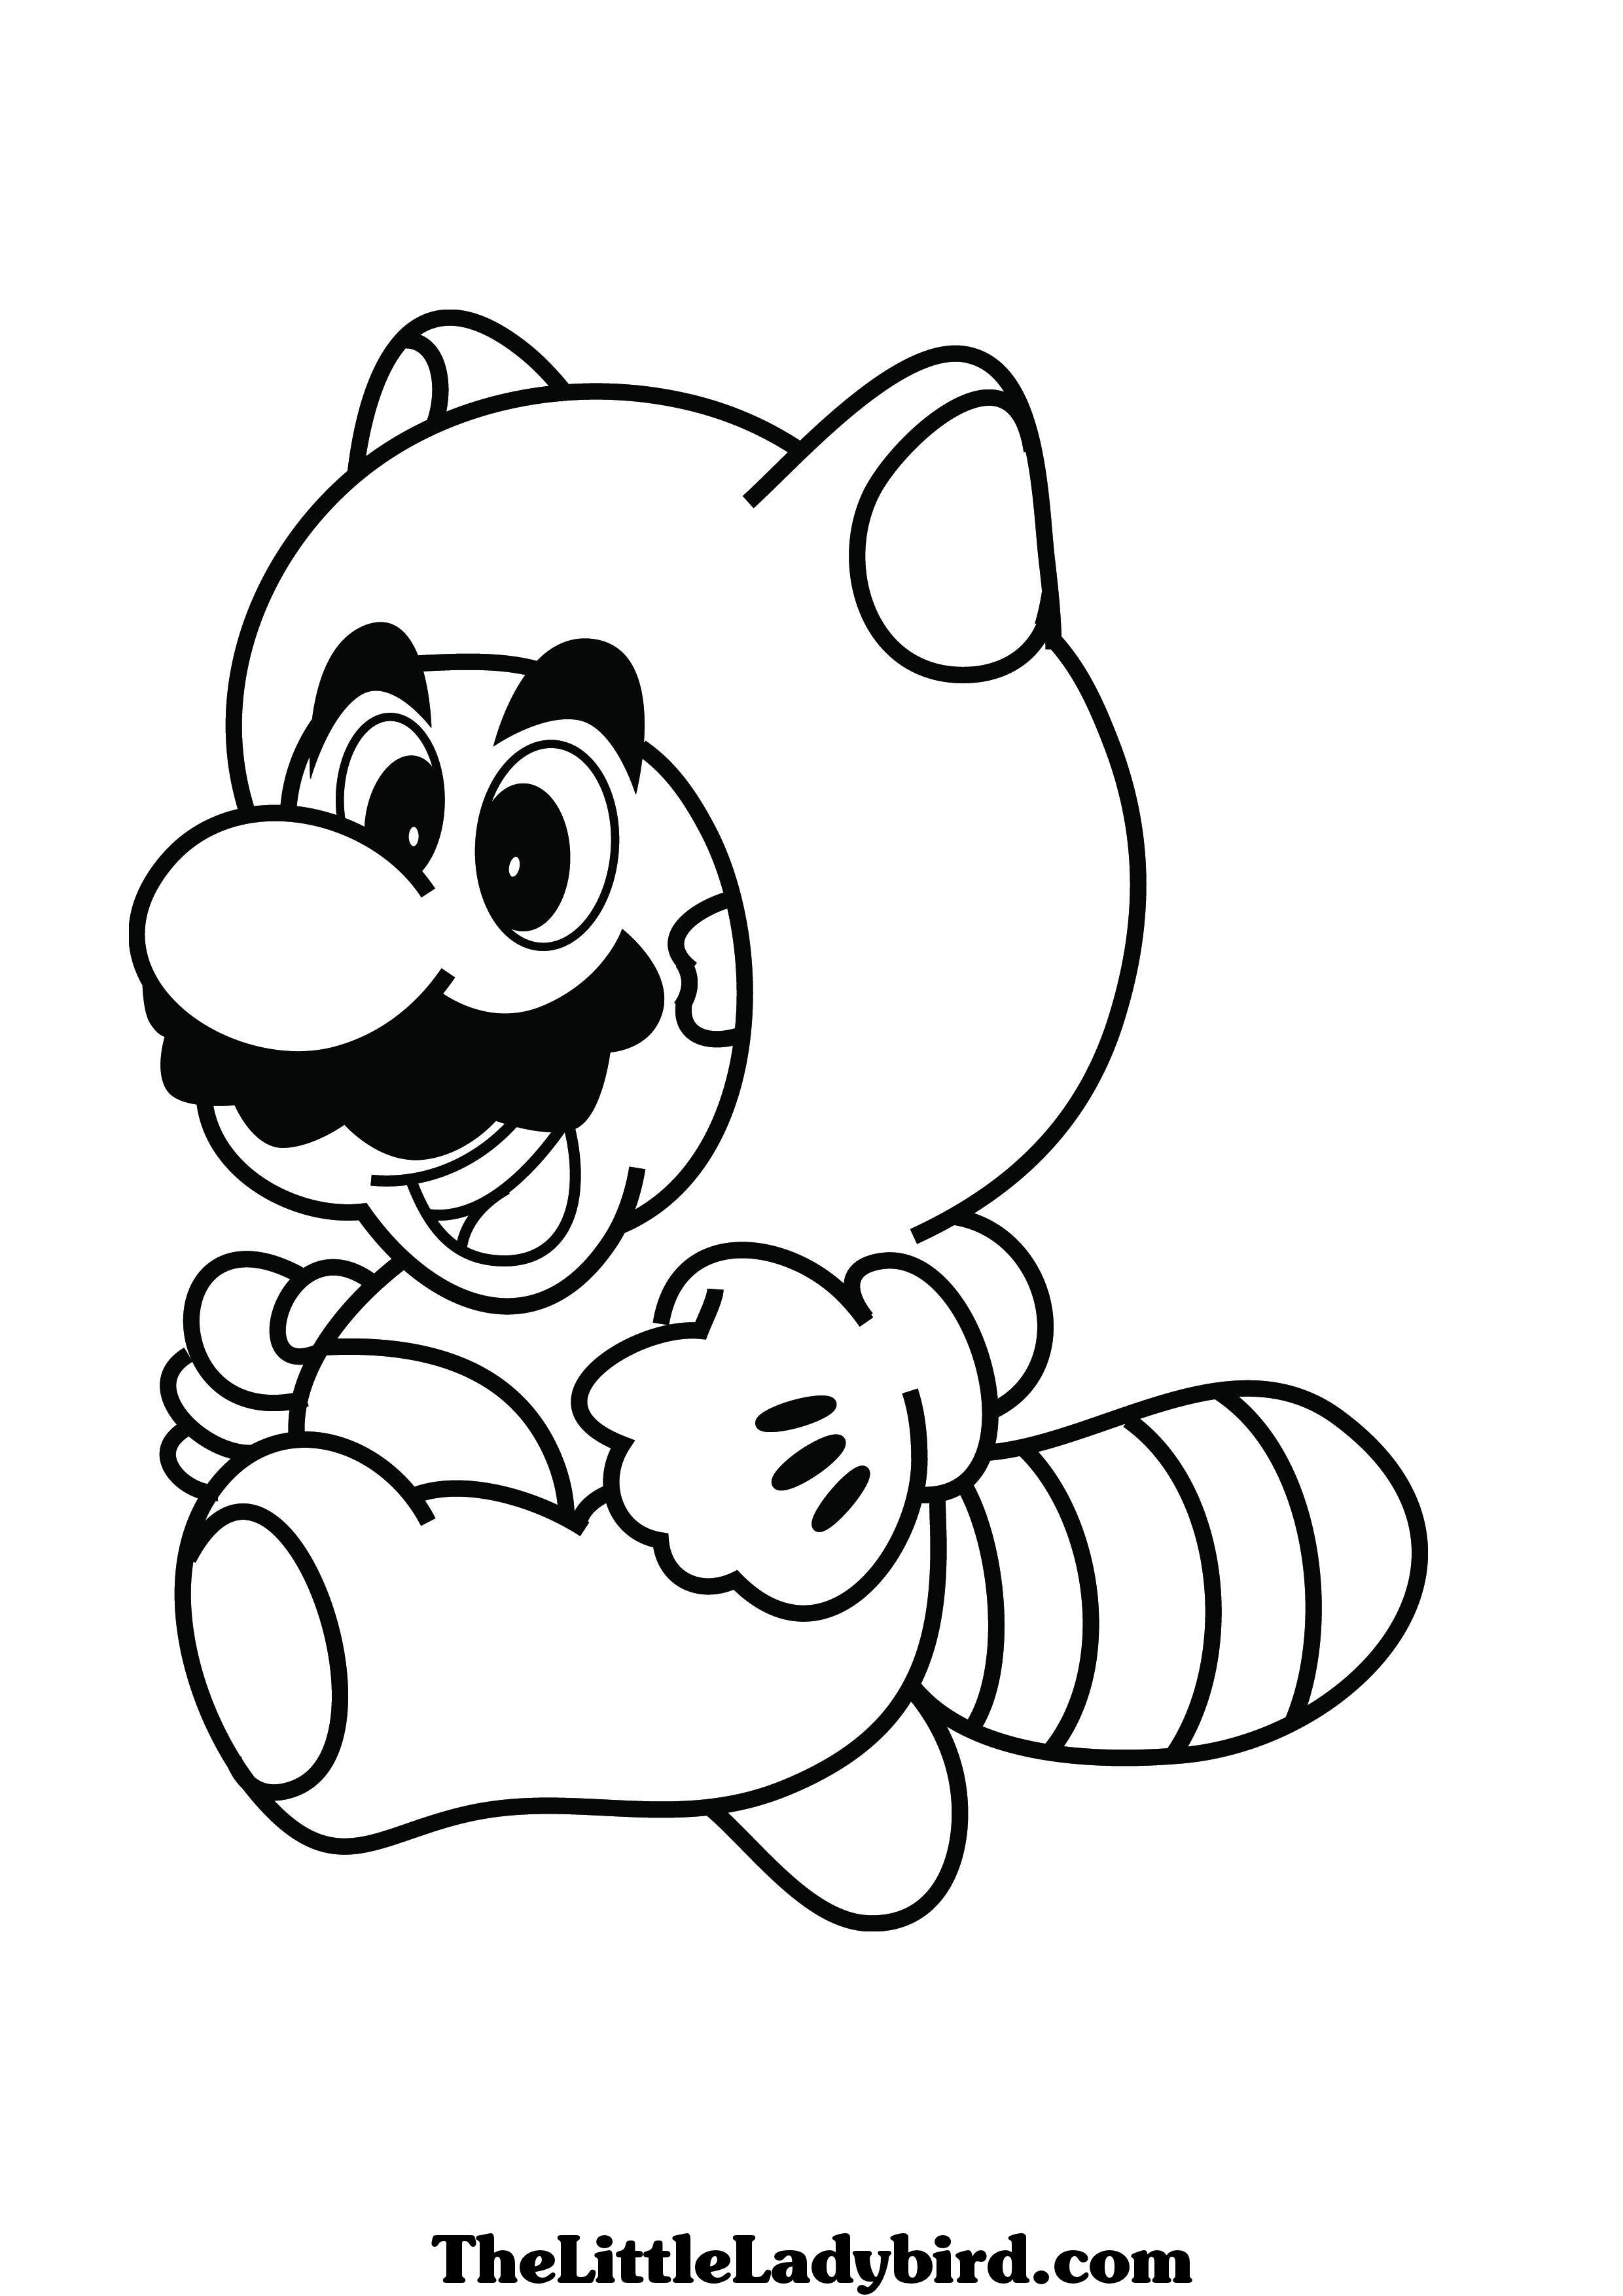 Yoshi Coloring Pages To Print Mario And Yoshi Coloring Pages At Getdrawings Free For